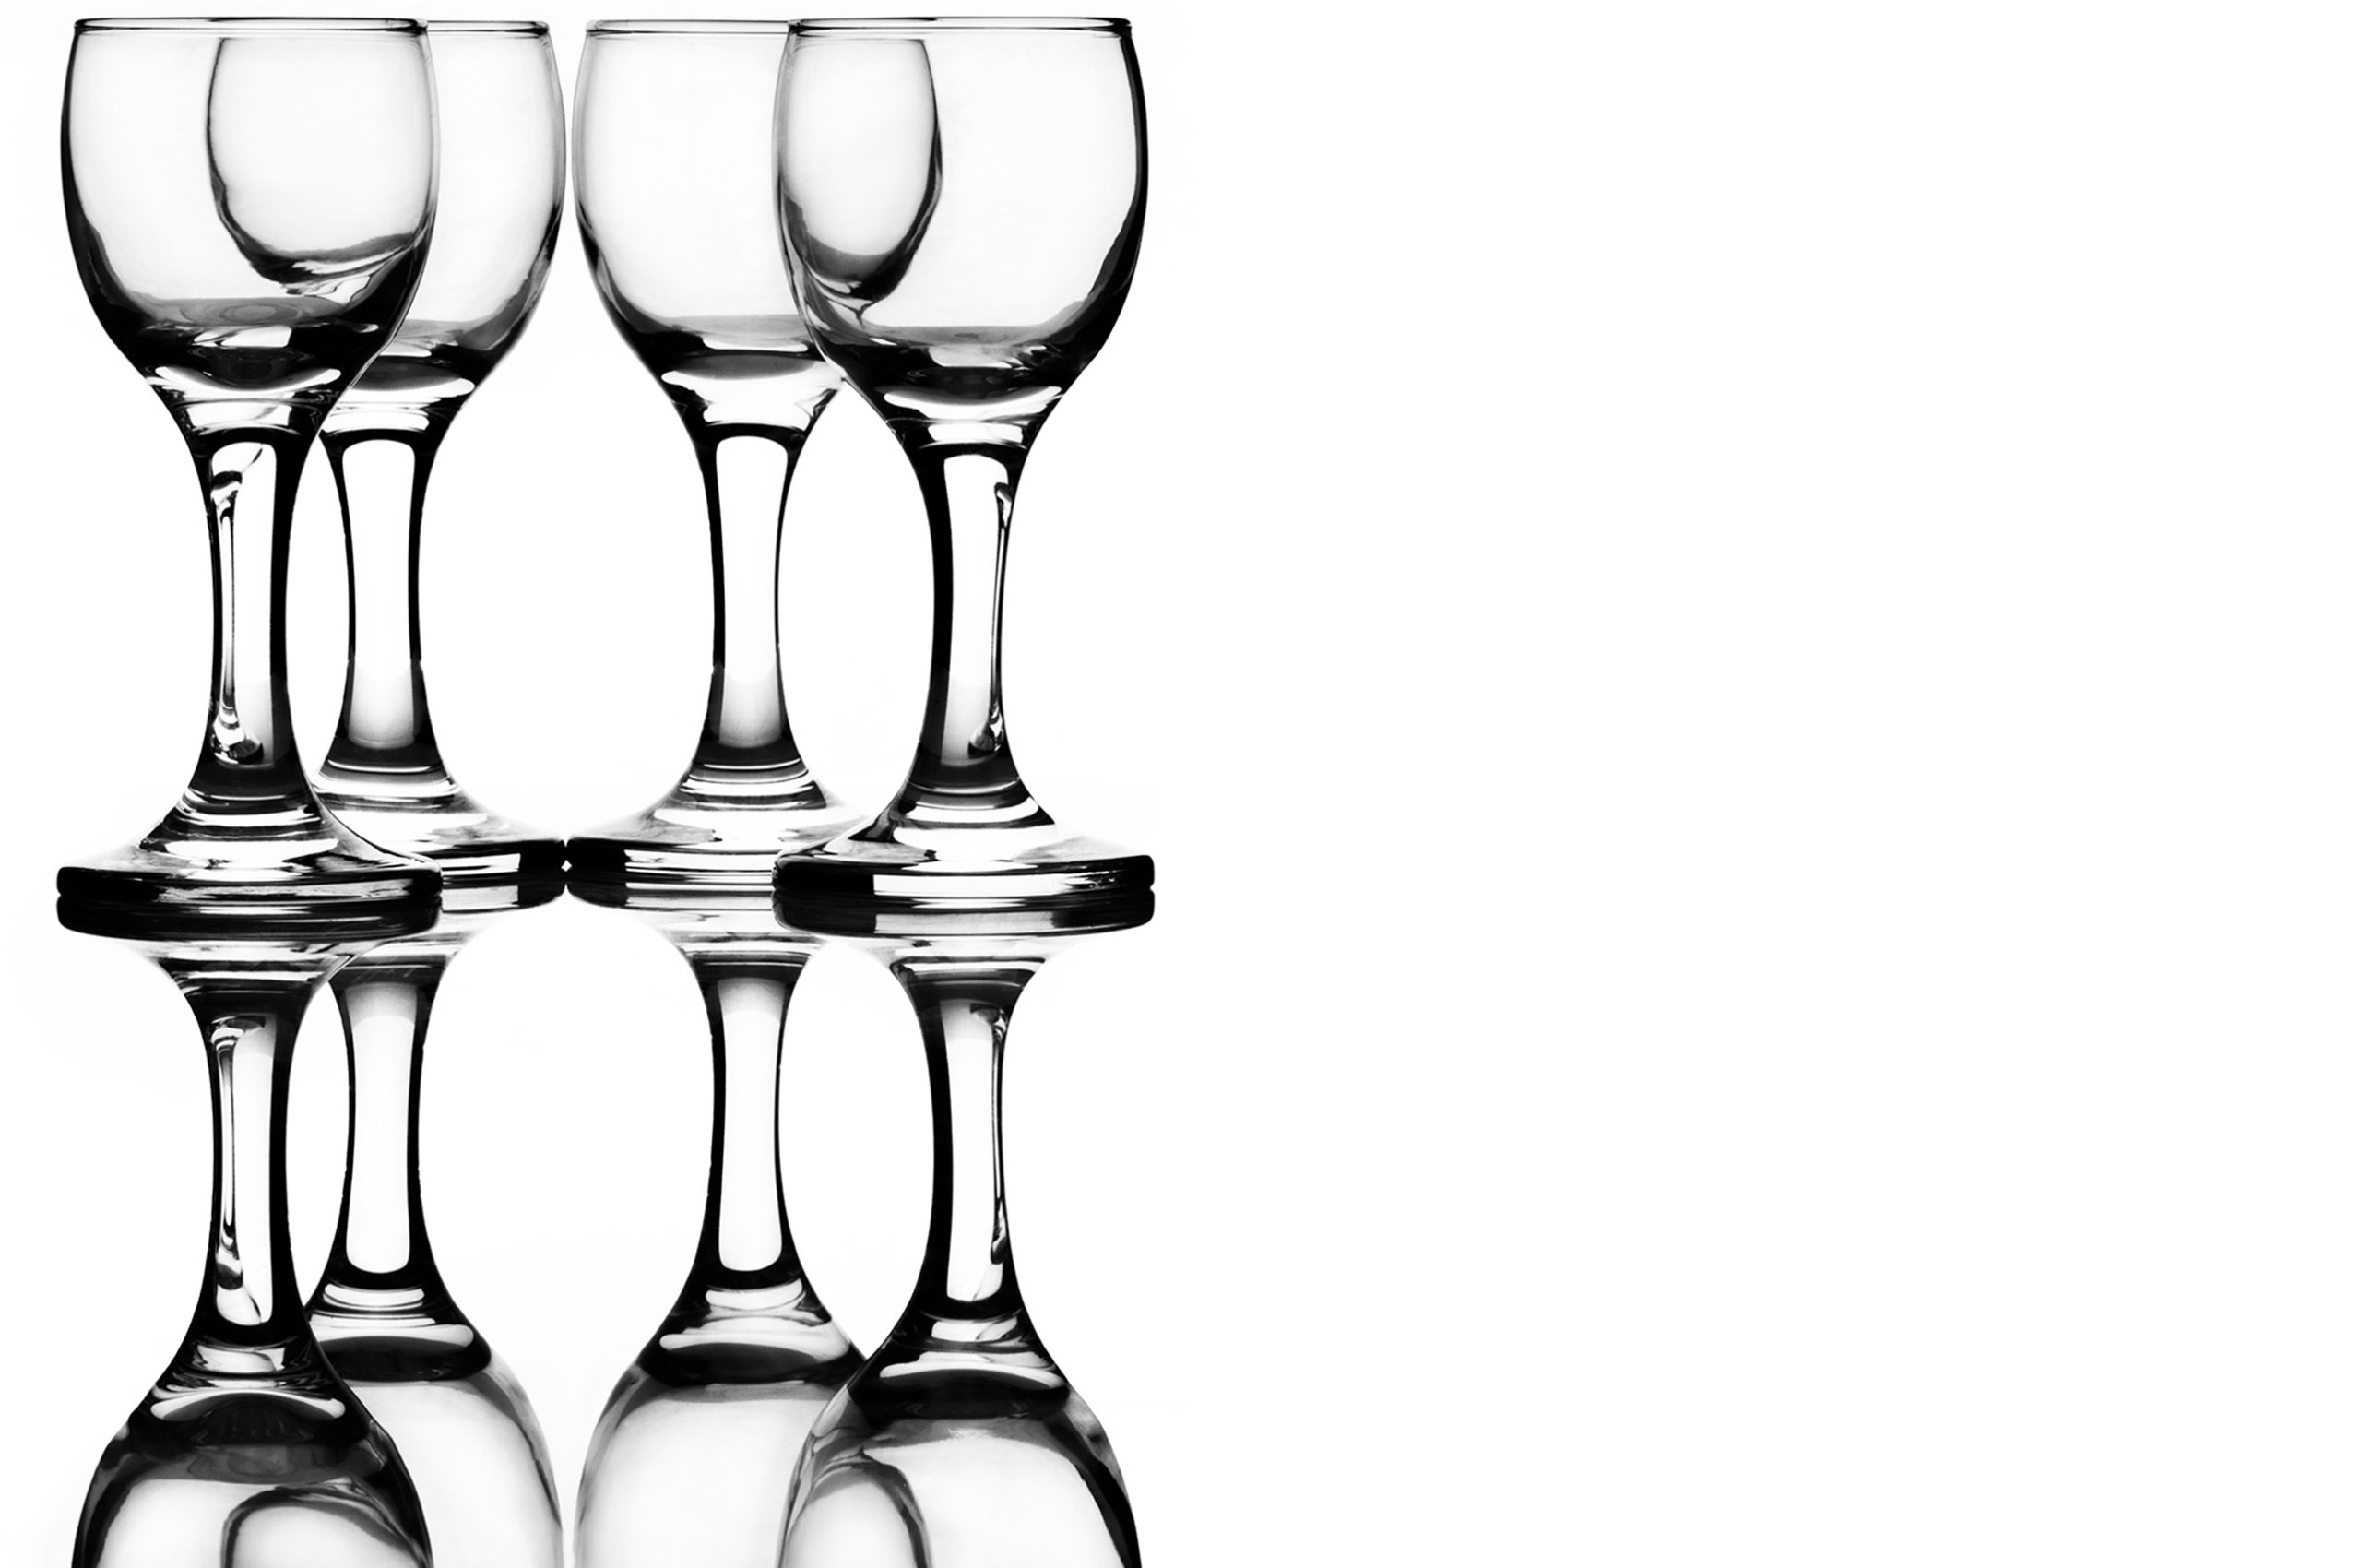 (After Editing) Set of Glassware photographed to show reflection on clear surface